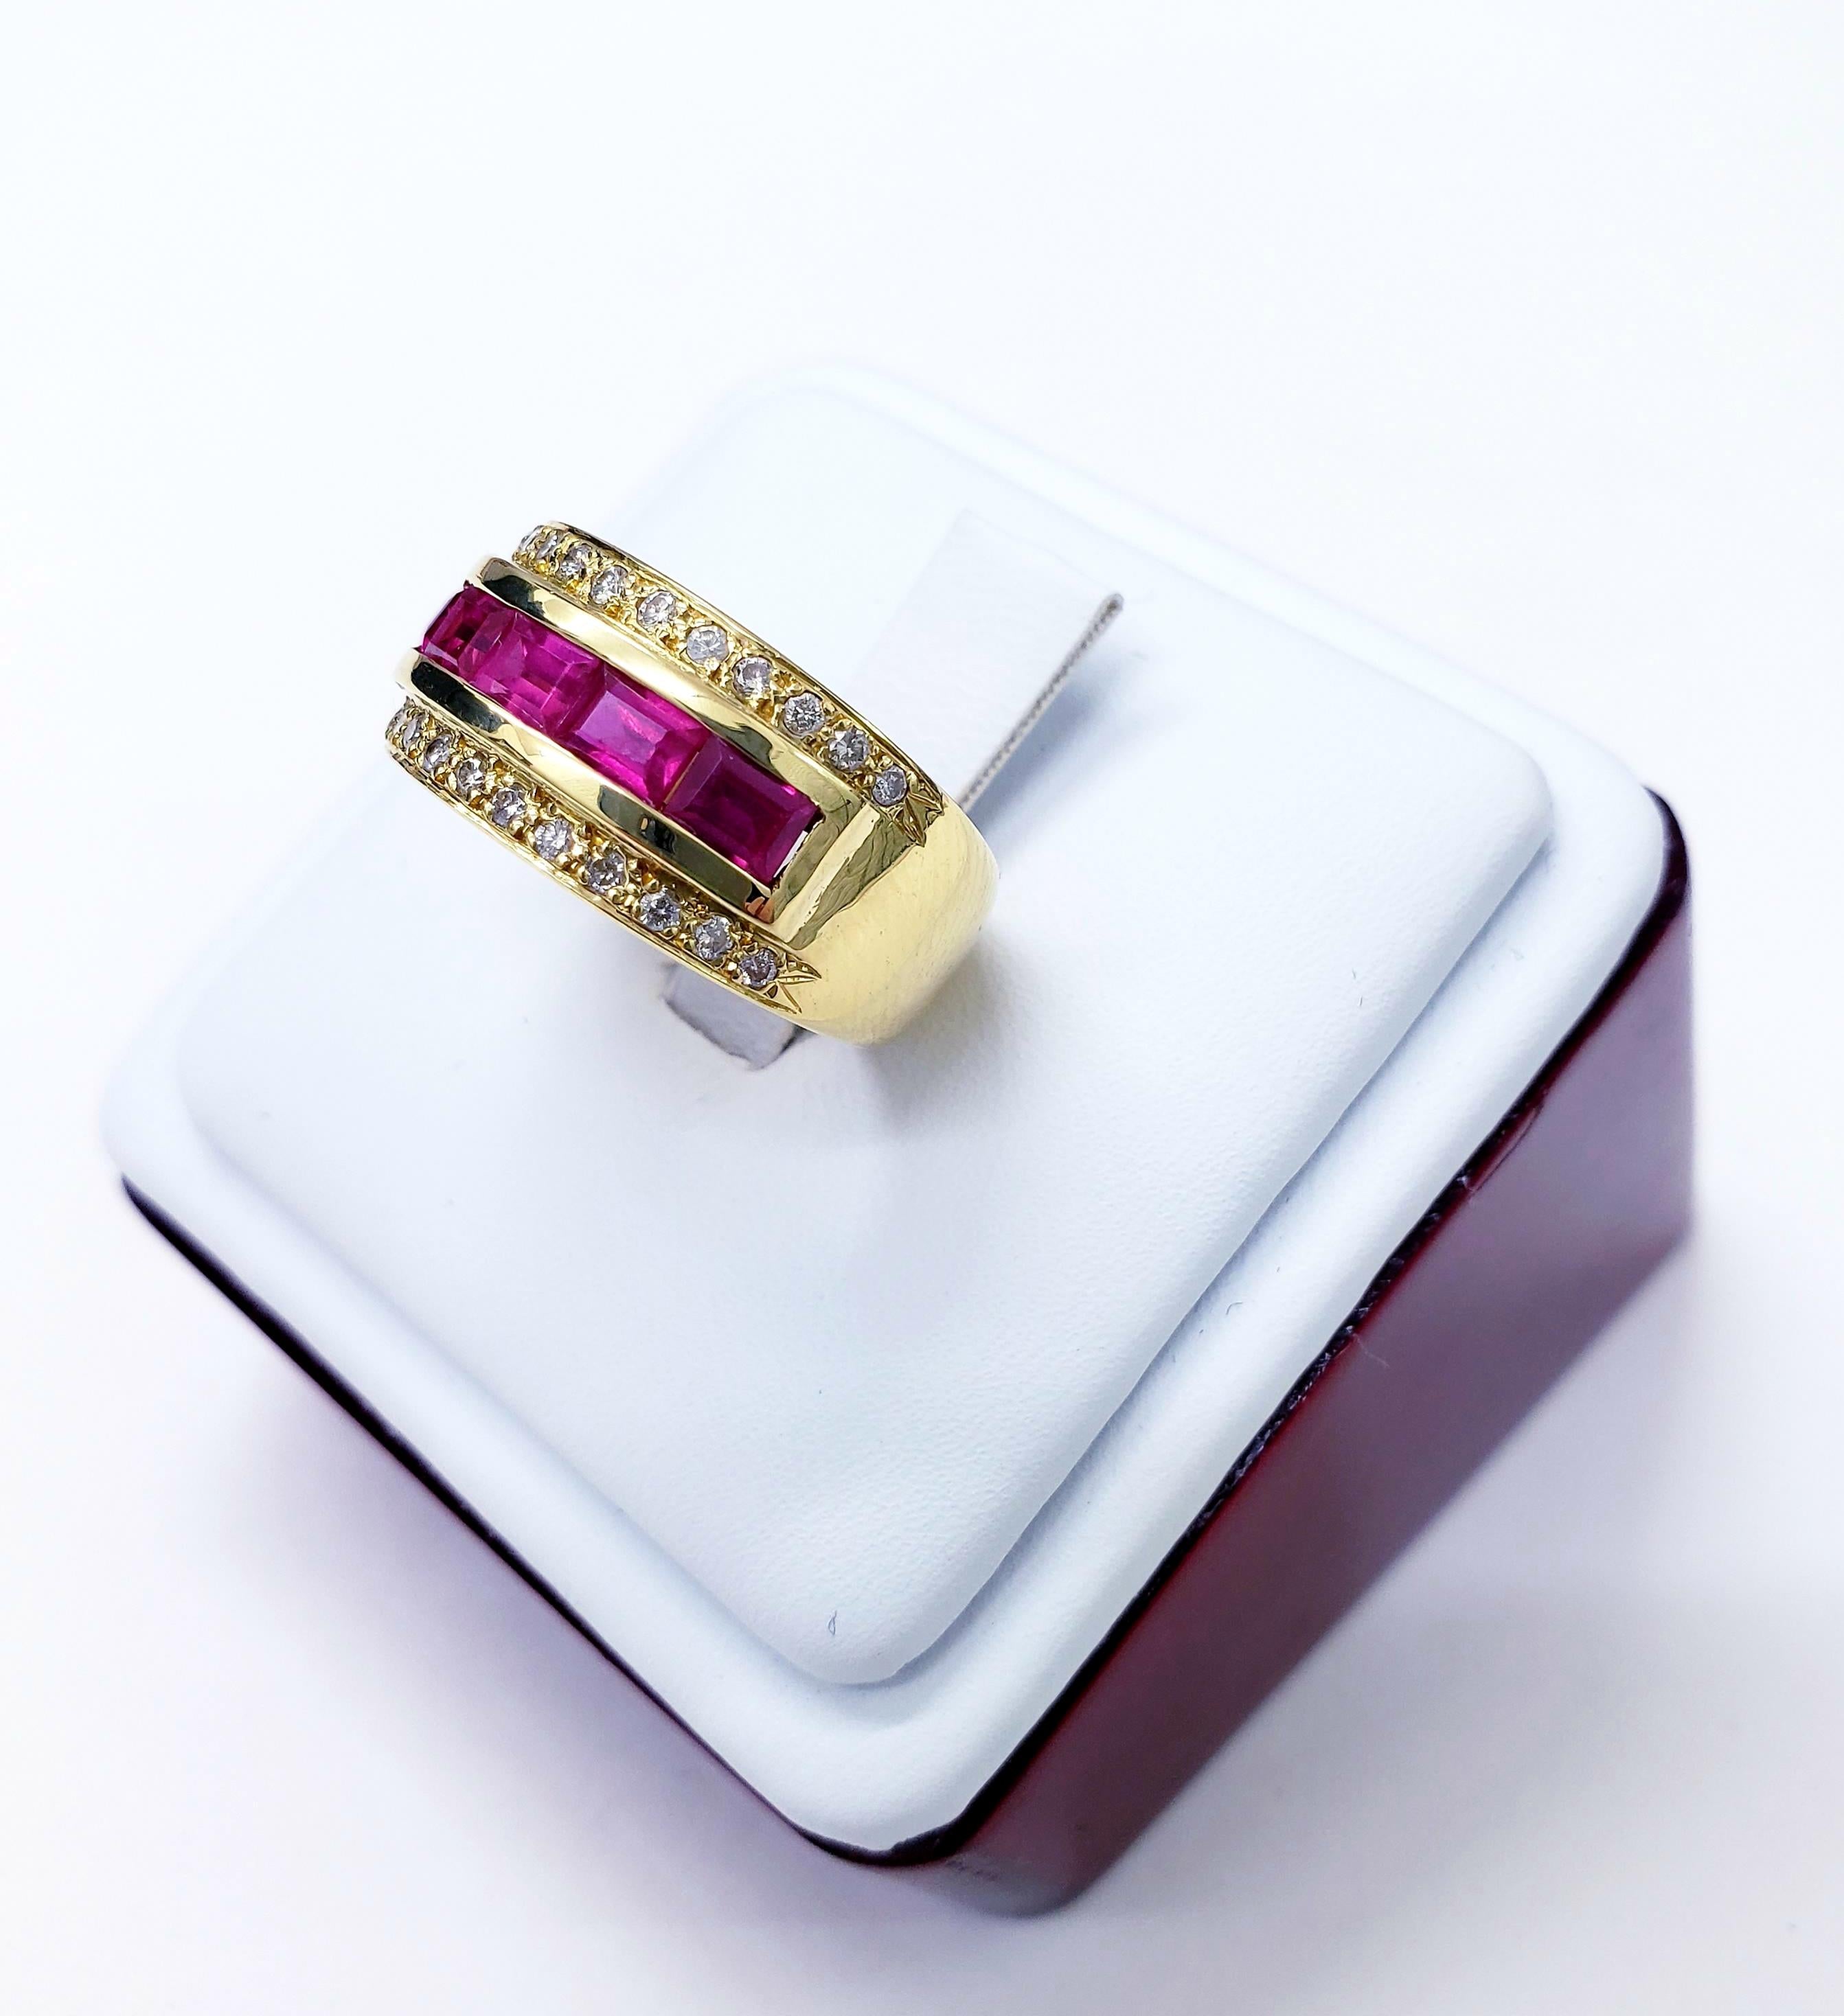 Vintage Ruby & Diamond Band Ring
The ruby stones are channel set and give it a very luxurious look.
Diamonds total carat approx weight 0.36
Ruby total carat approx weight 1.00
Size 6.5
Circa 1970's
